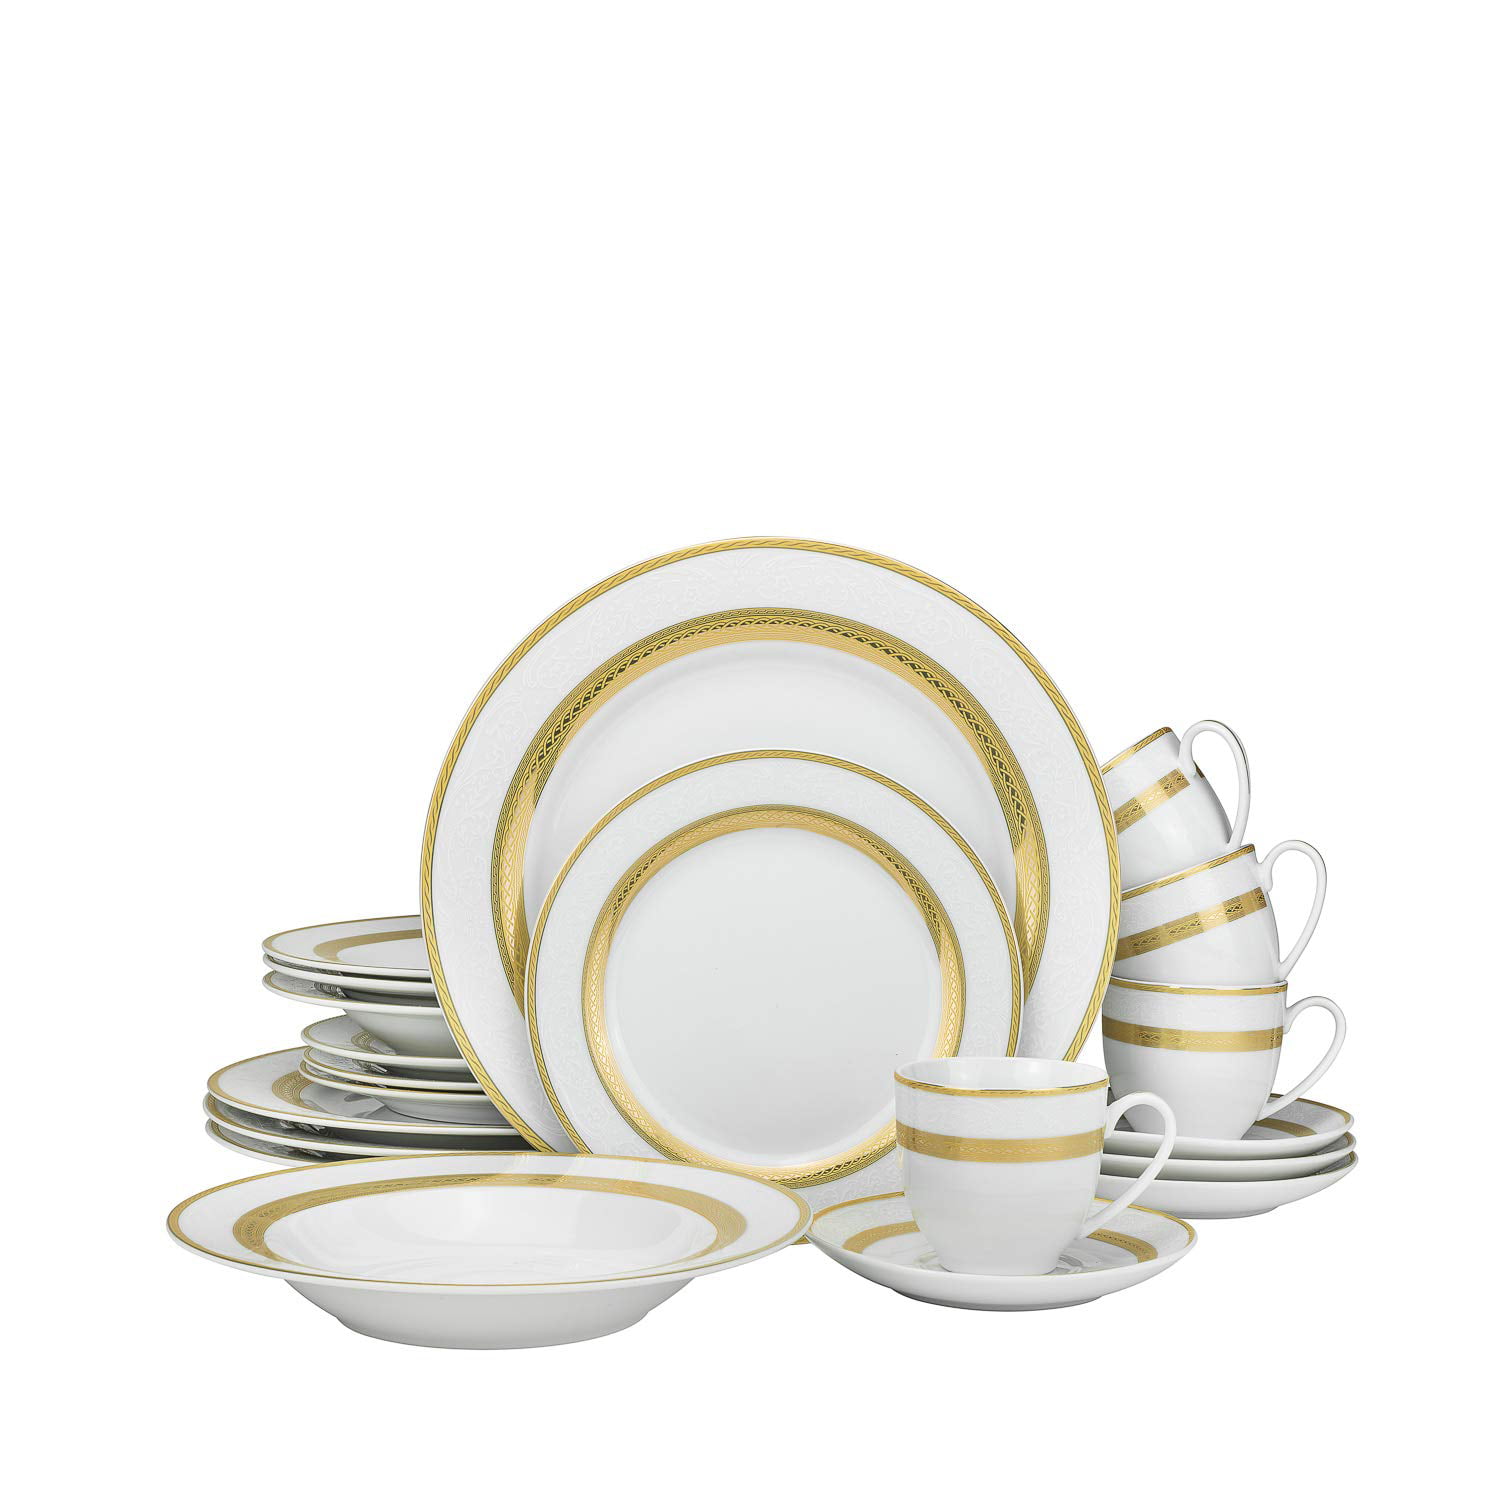 Euro Porcelain 20-pc Luxury Dinnerware Set w/ 24K Gold Ornament, HQ Dining  Tableware Service for 4 (093) 